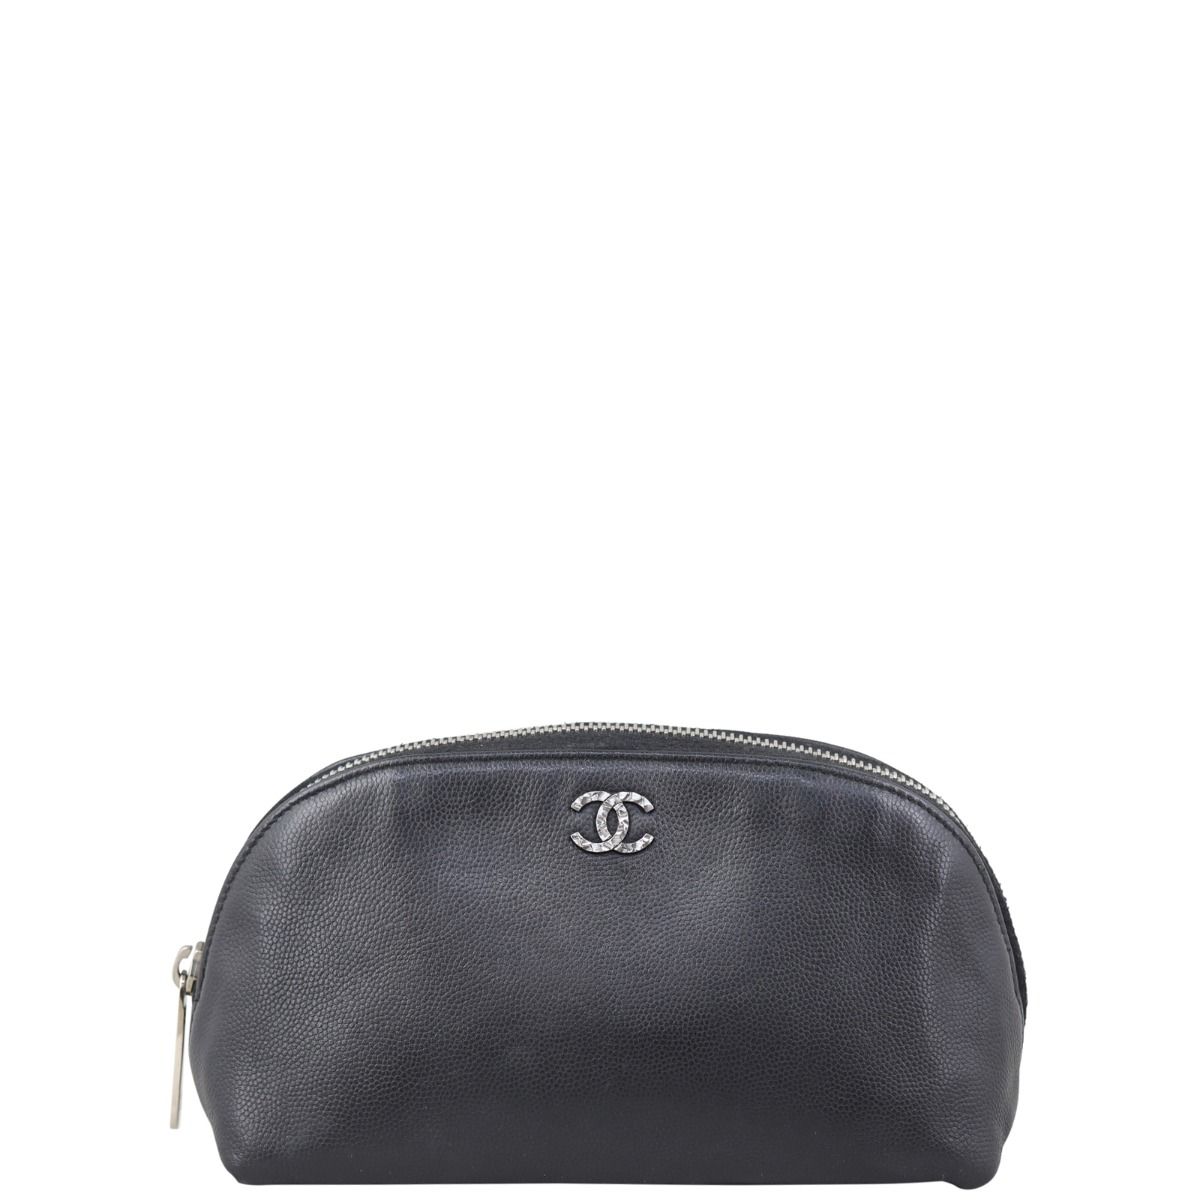 Chanel Cosmetic Pouch